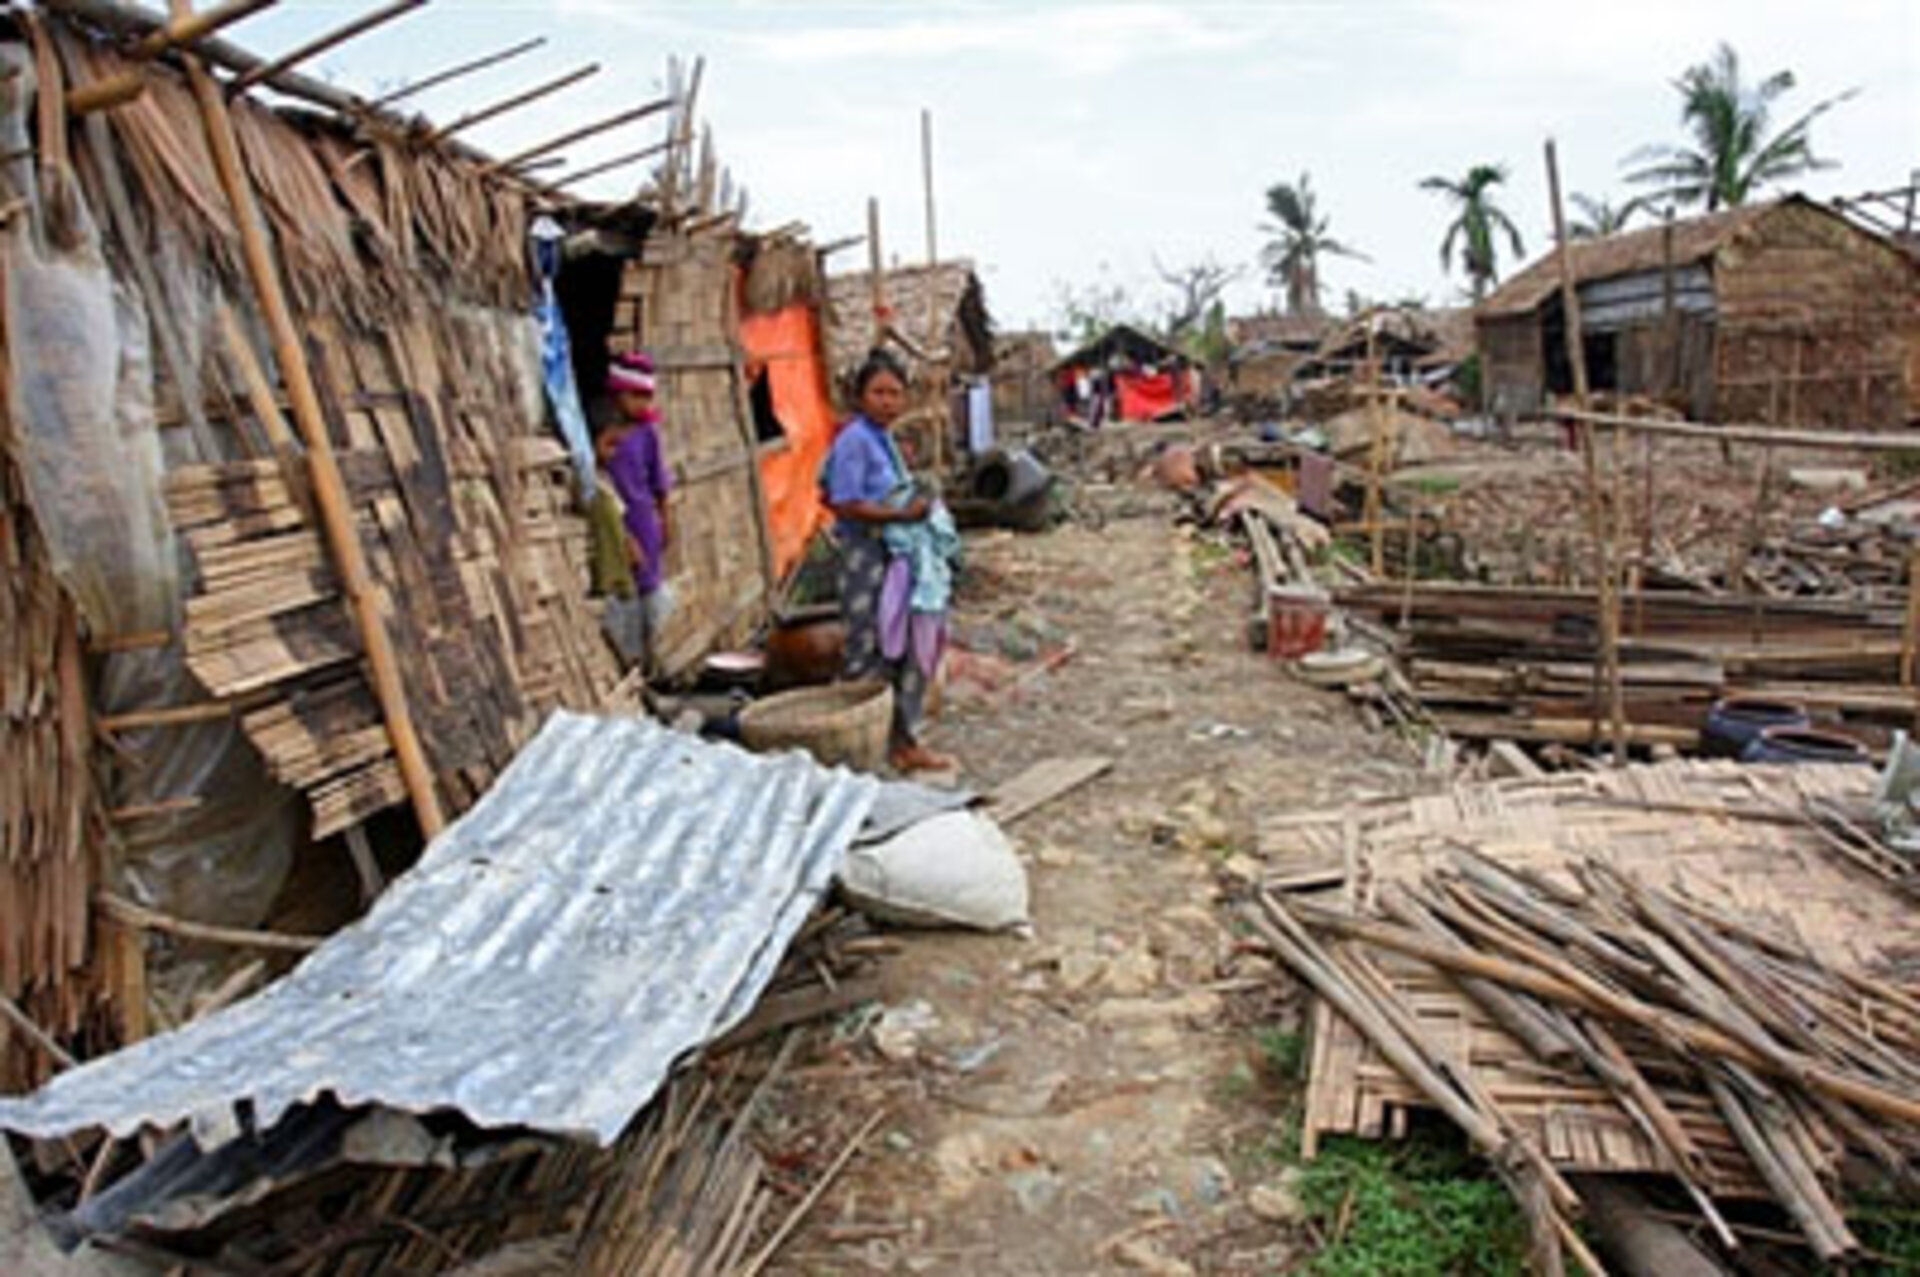 ESA - The town of Labutta after Cyclone Nargis devastated Myanmar's Irrawaddy Delta